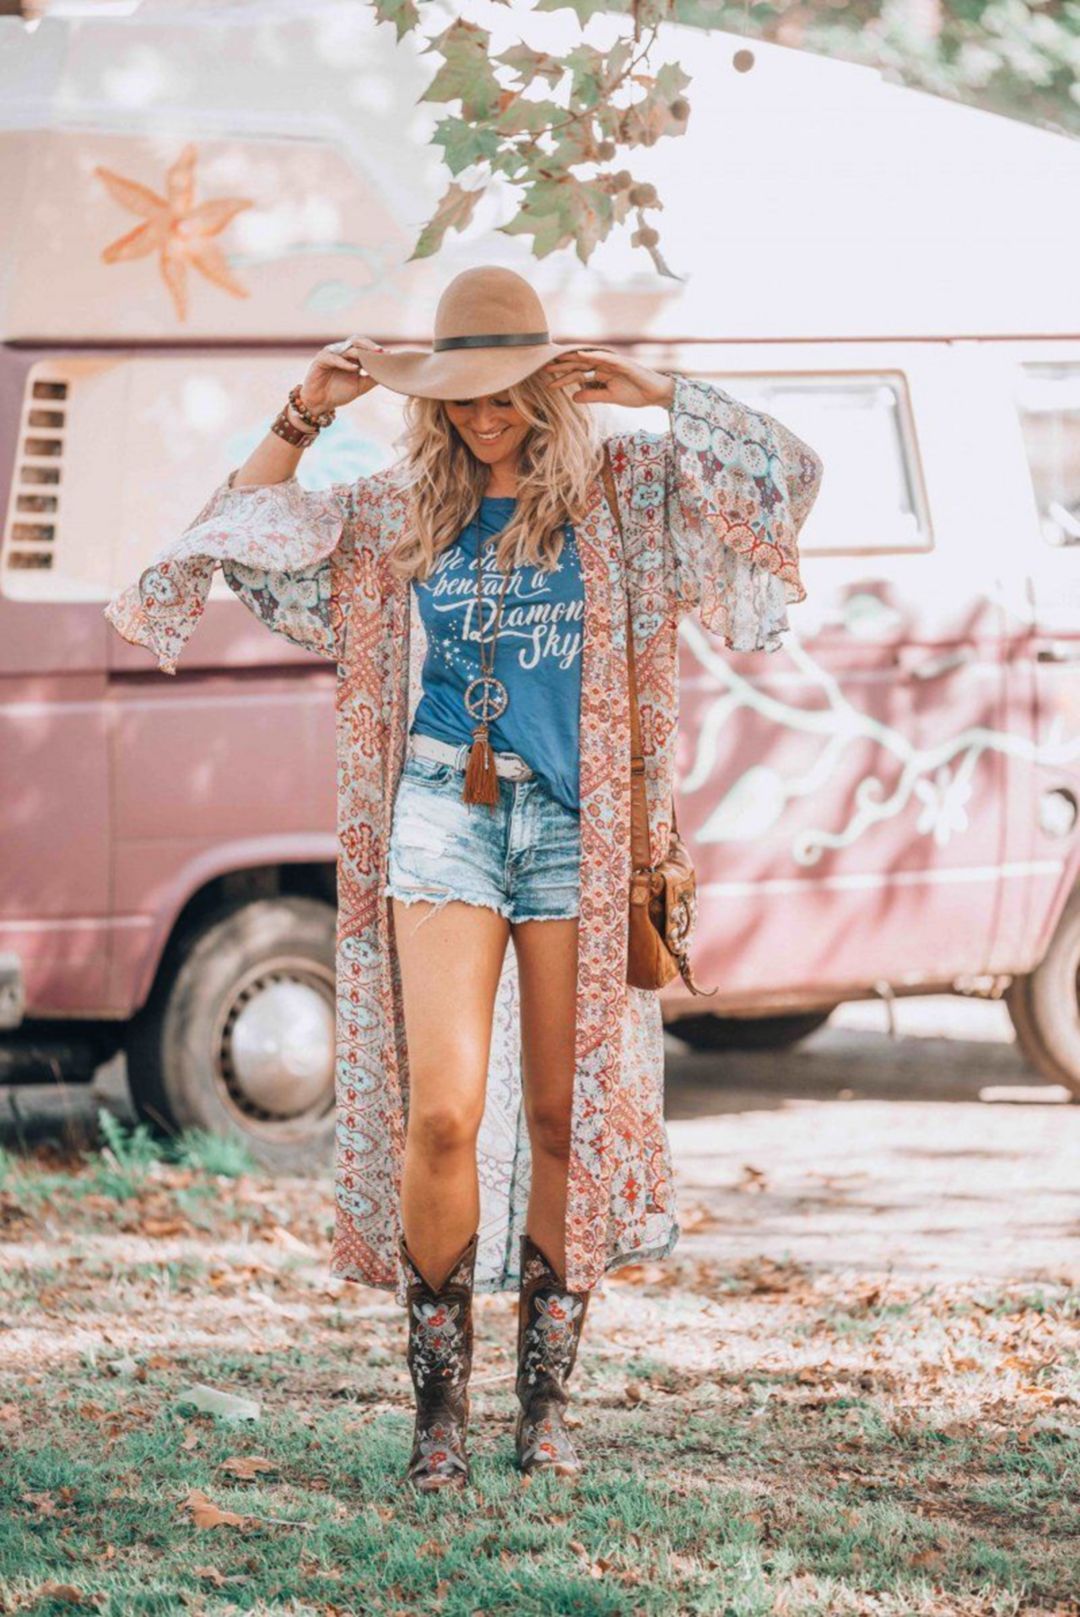 15 Amazing Beach Hippie Style Ideas For Today's Trends - 15 Amazing Beach Hippie Style Ideas For Today's Trends -   16 style Hippie bohemian ideas